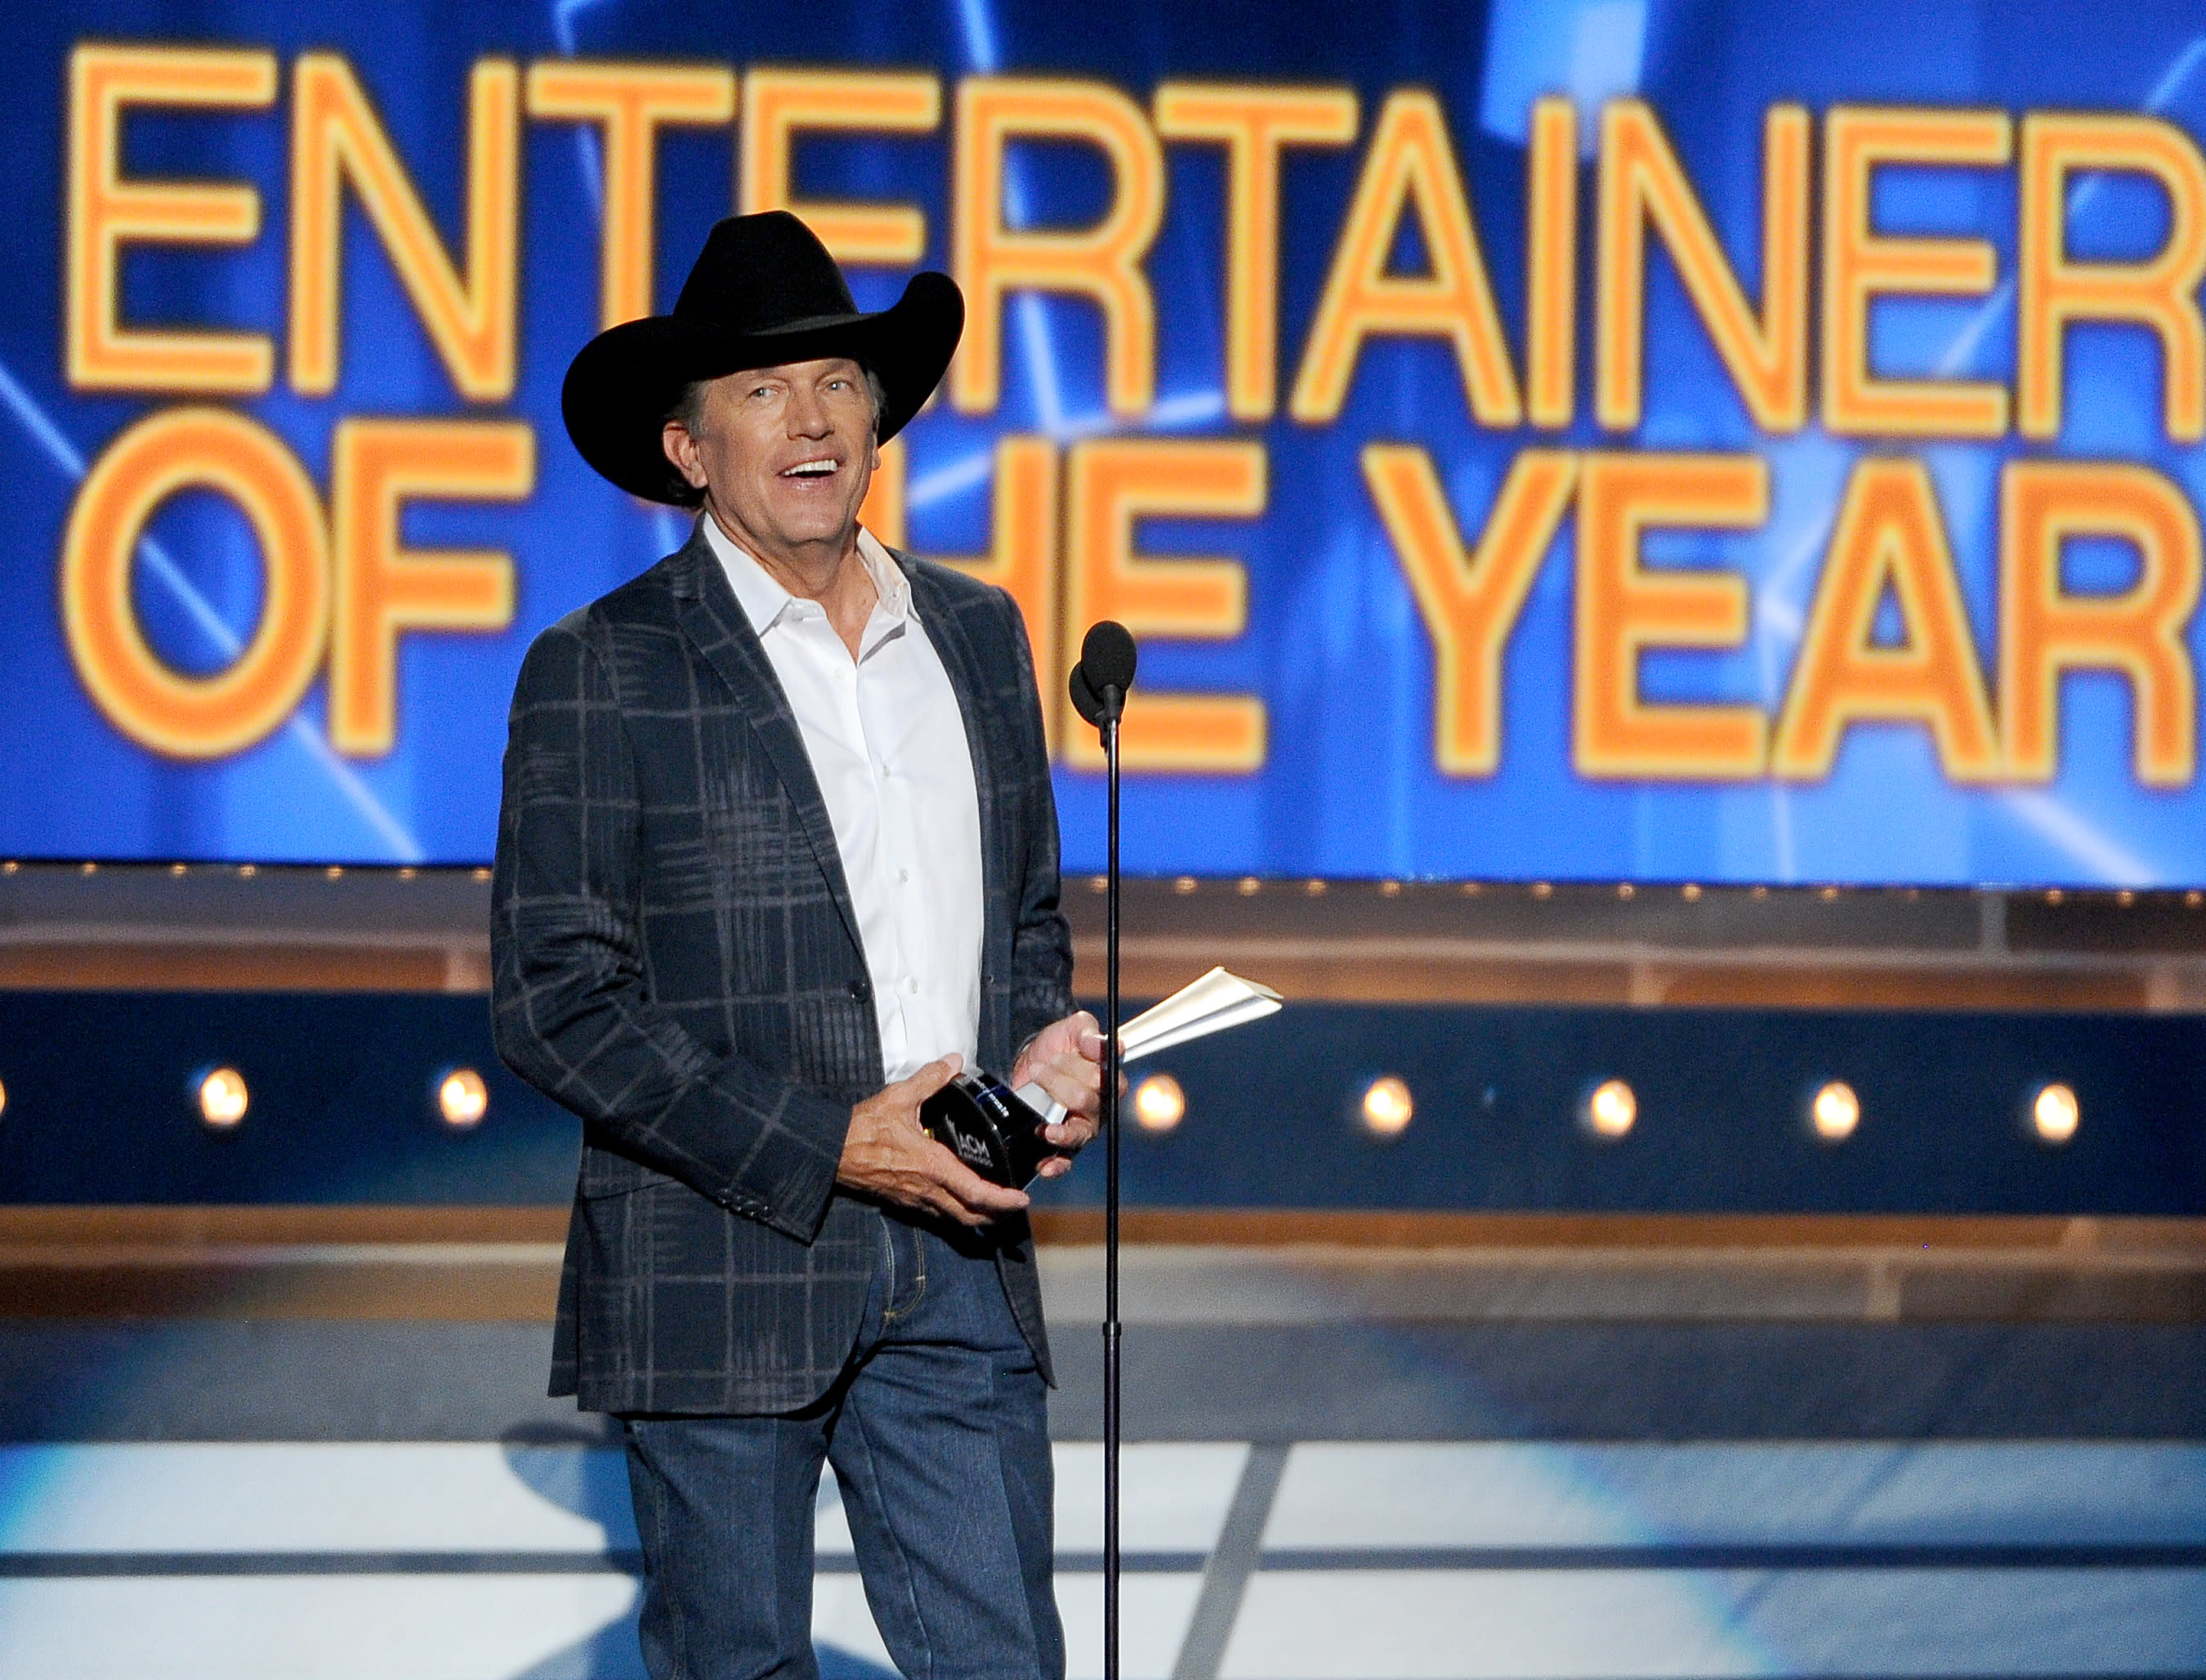 Strait wins entertainer of the year at ACM Awards